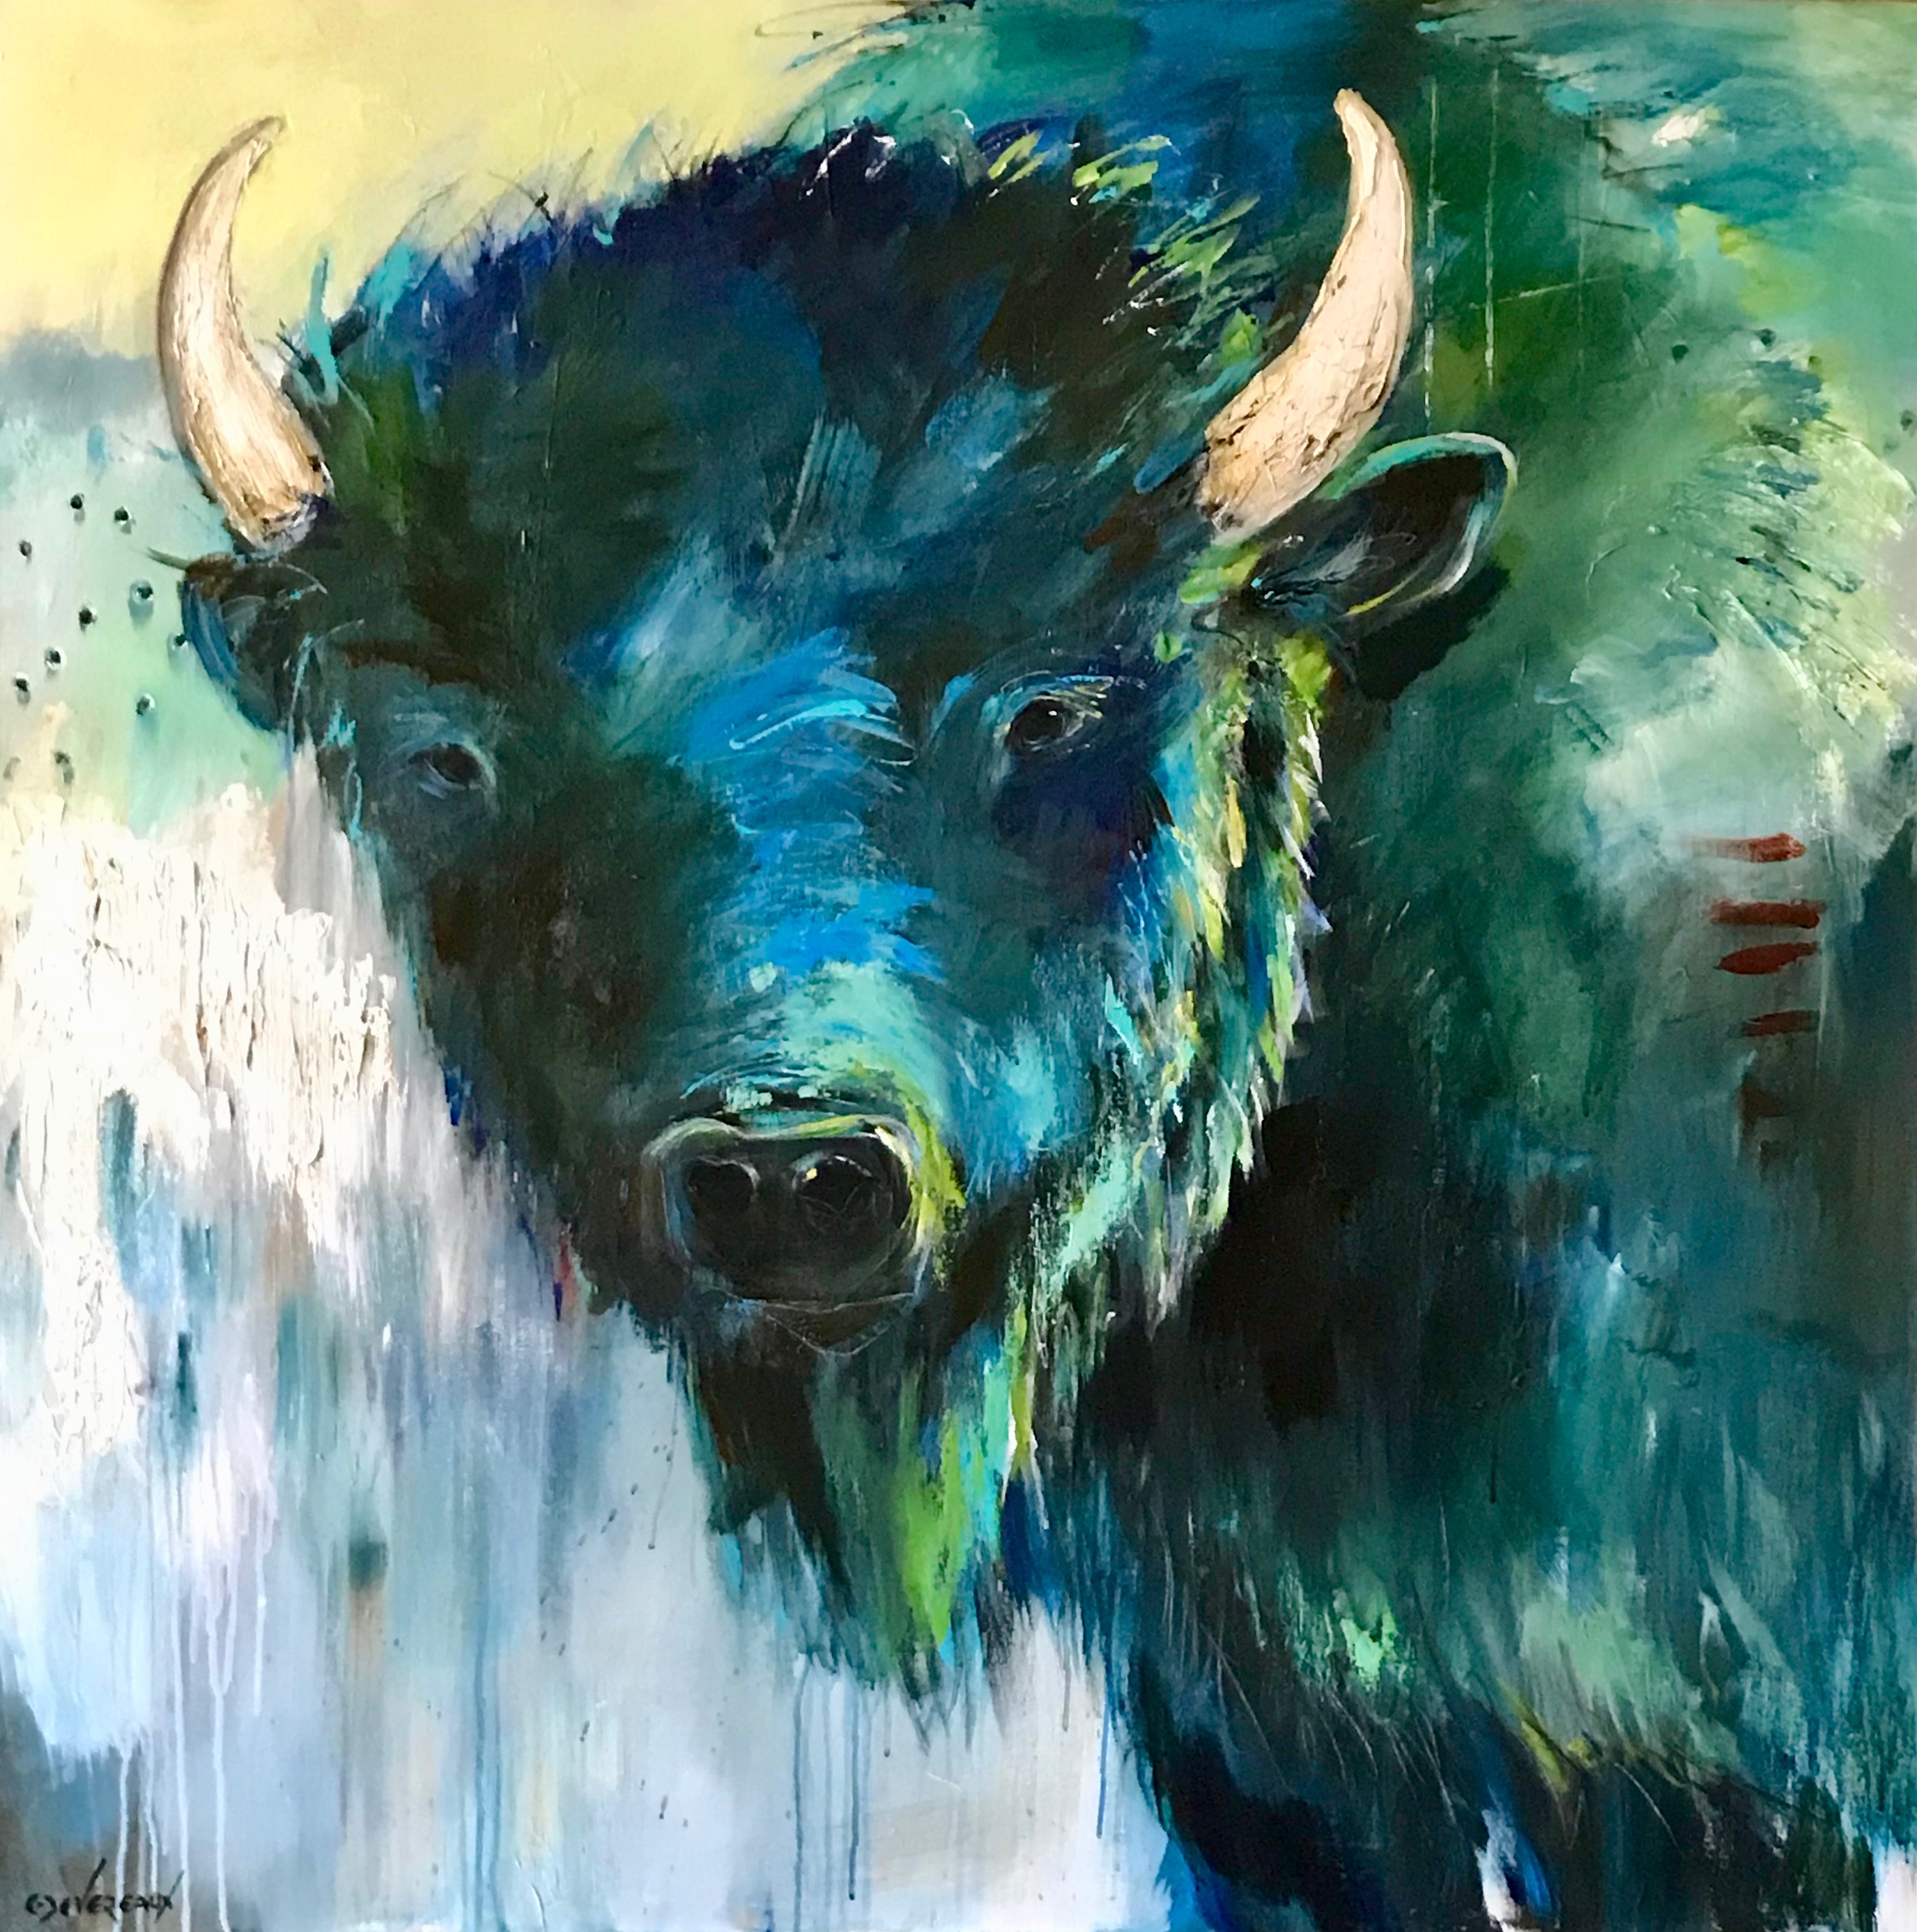 ‘The Blues’ 42×42 Contemporary Modern Bison Buffalo Painting by Cher Devereaux on stretched canvas